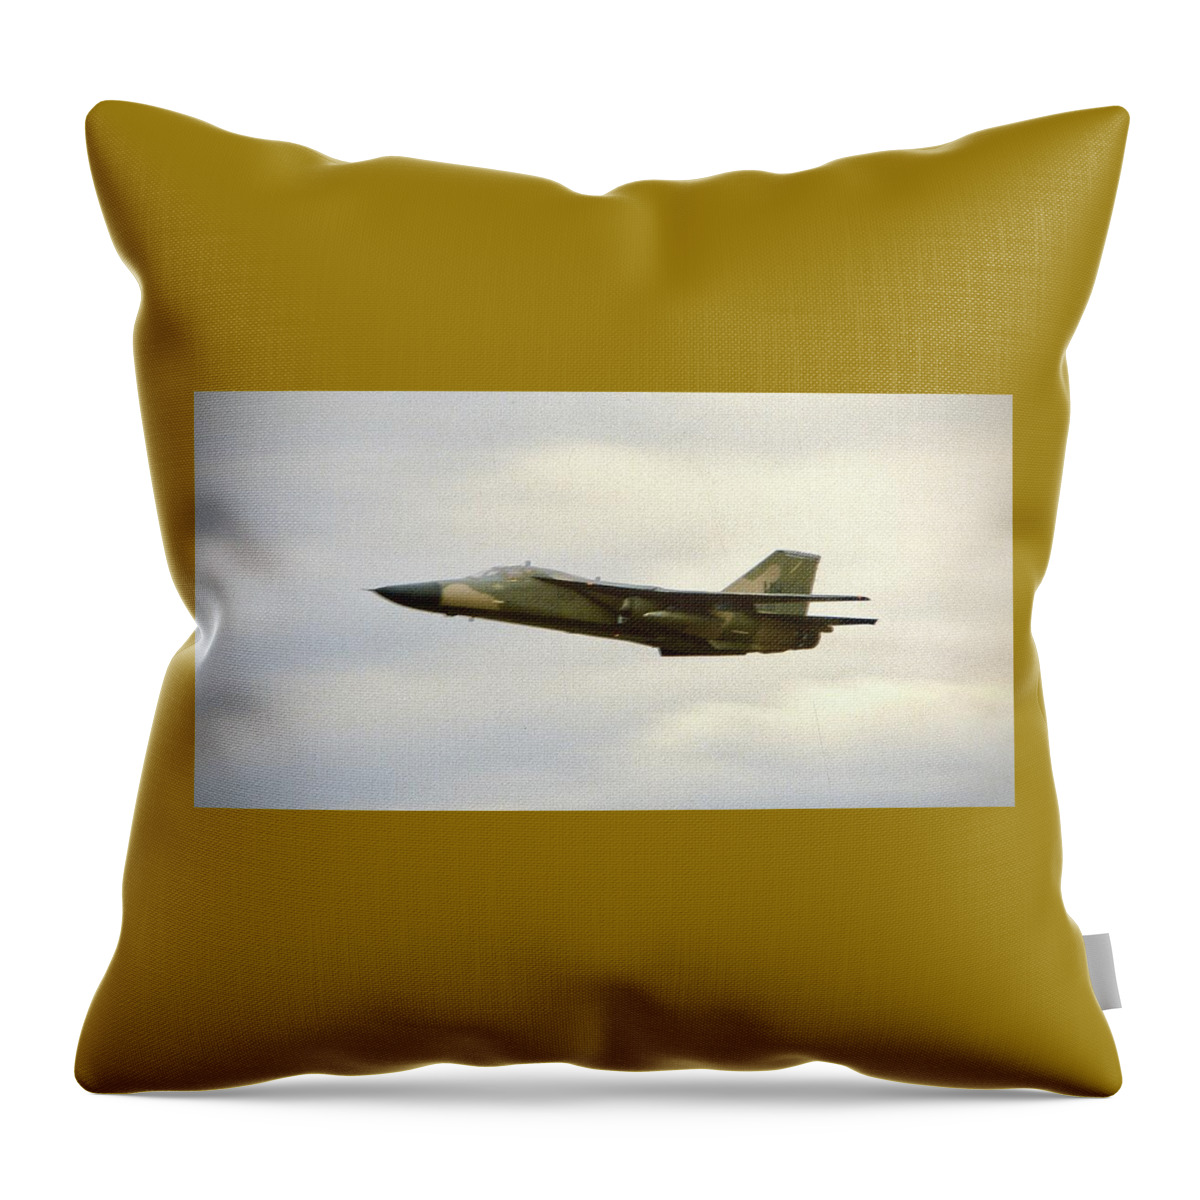 General Dynamics Throw Pillow featuring the photograph General Dynamics F-111 by Gordon James